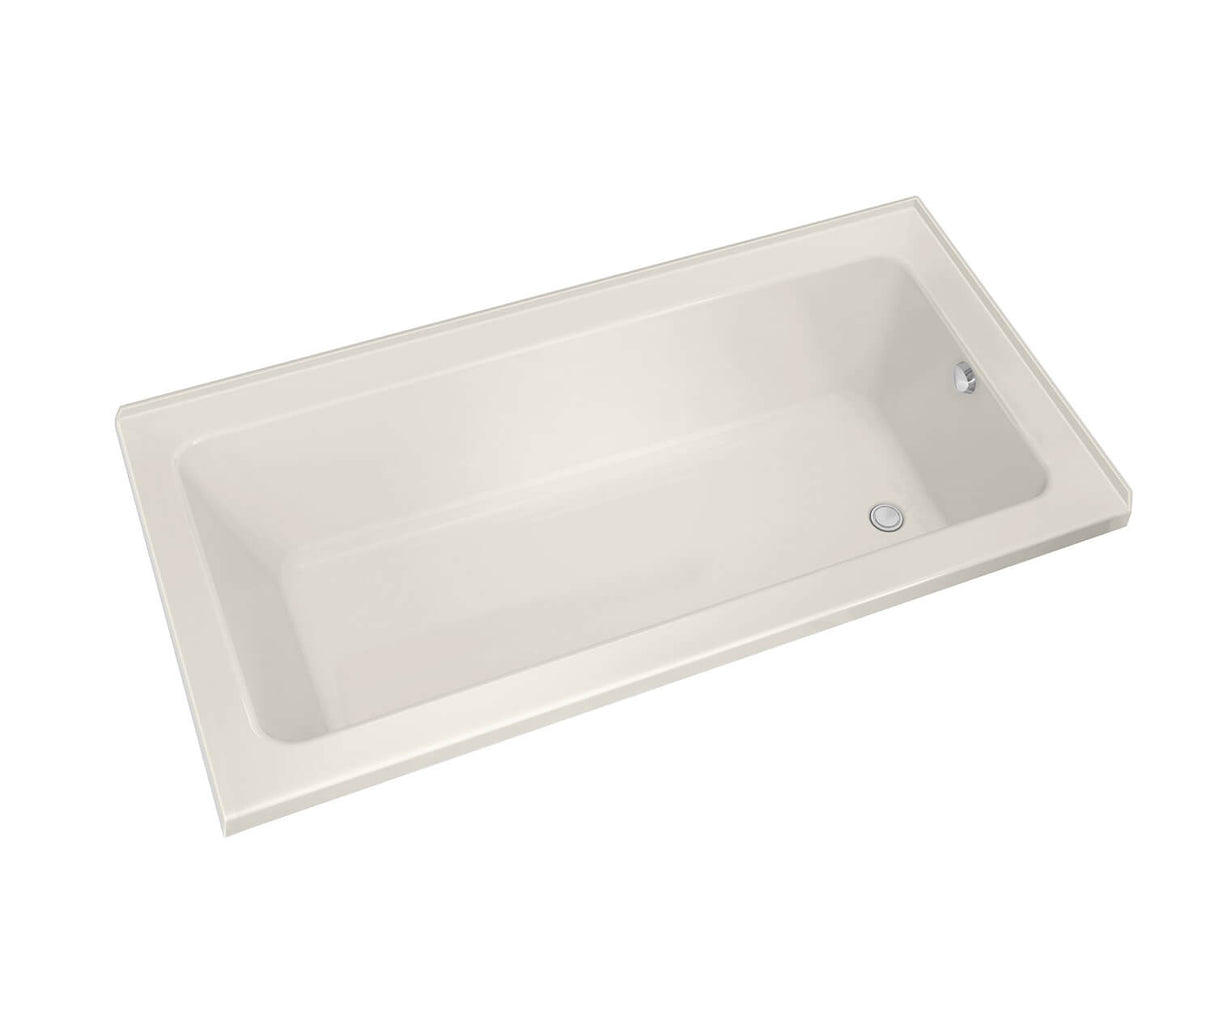 MAAX 106212-R-103-007 Pose 7236 IF Acrylic Corner Right Right-Hand Drain Aeroeffect Bathtub in Biscuit